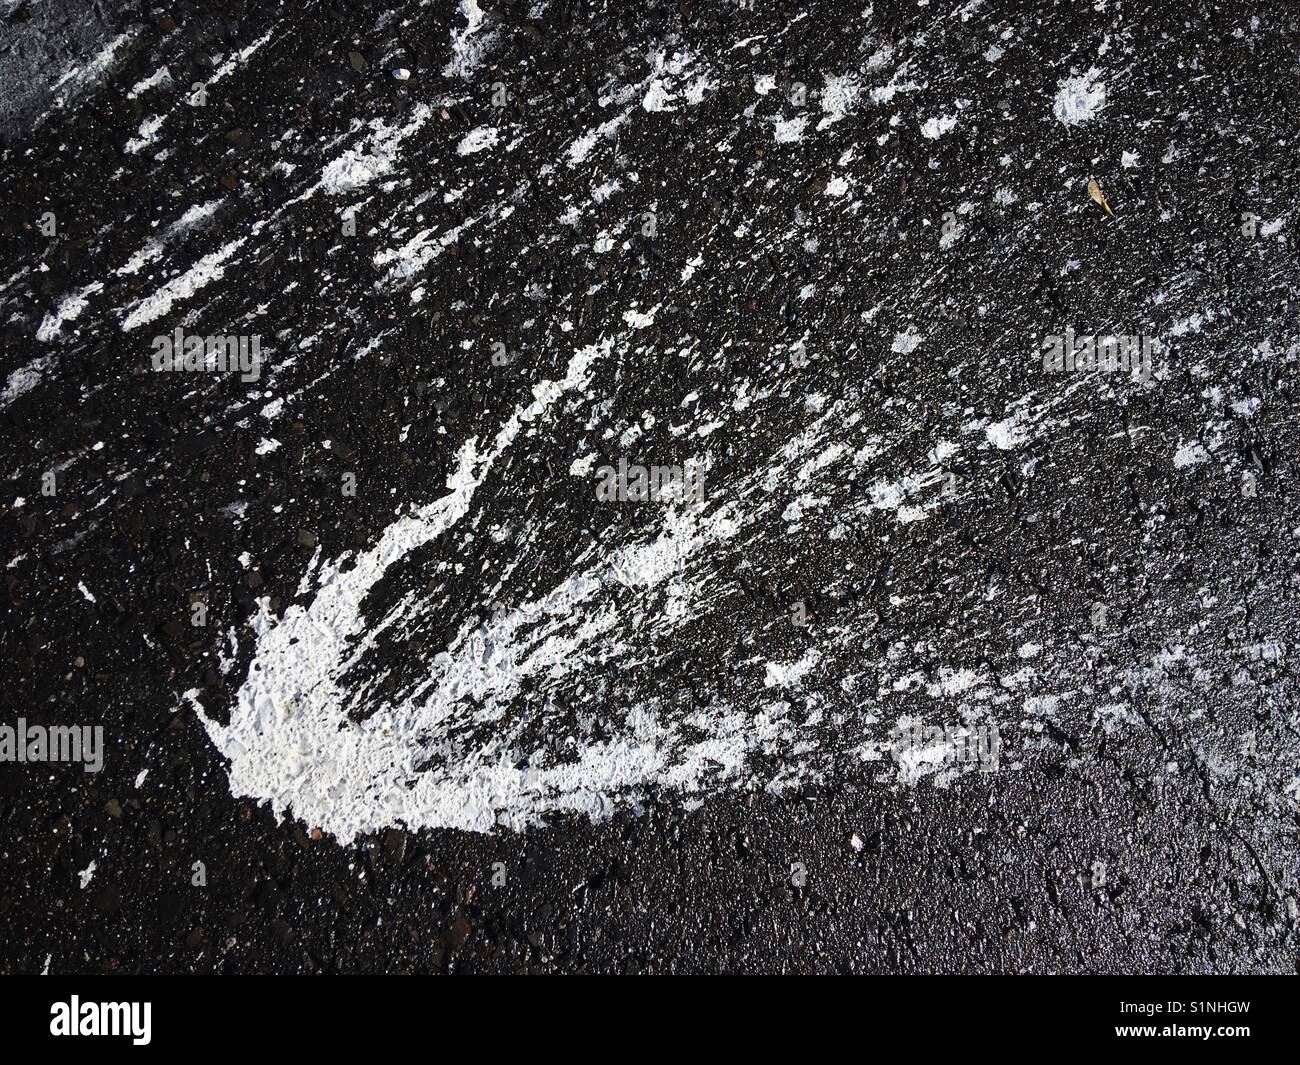 A stain of White paint on the tarmac Stock Photo